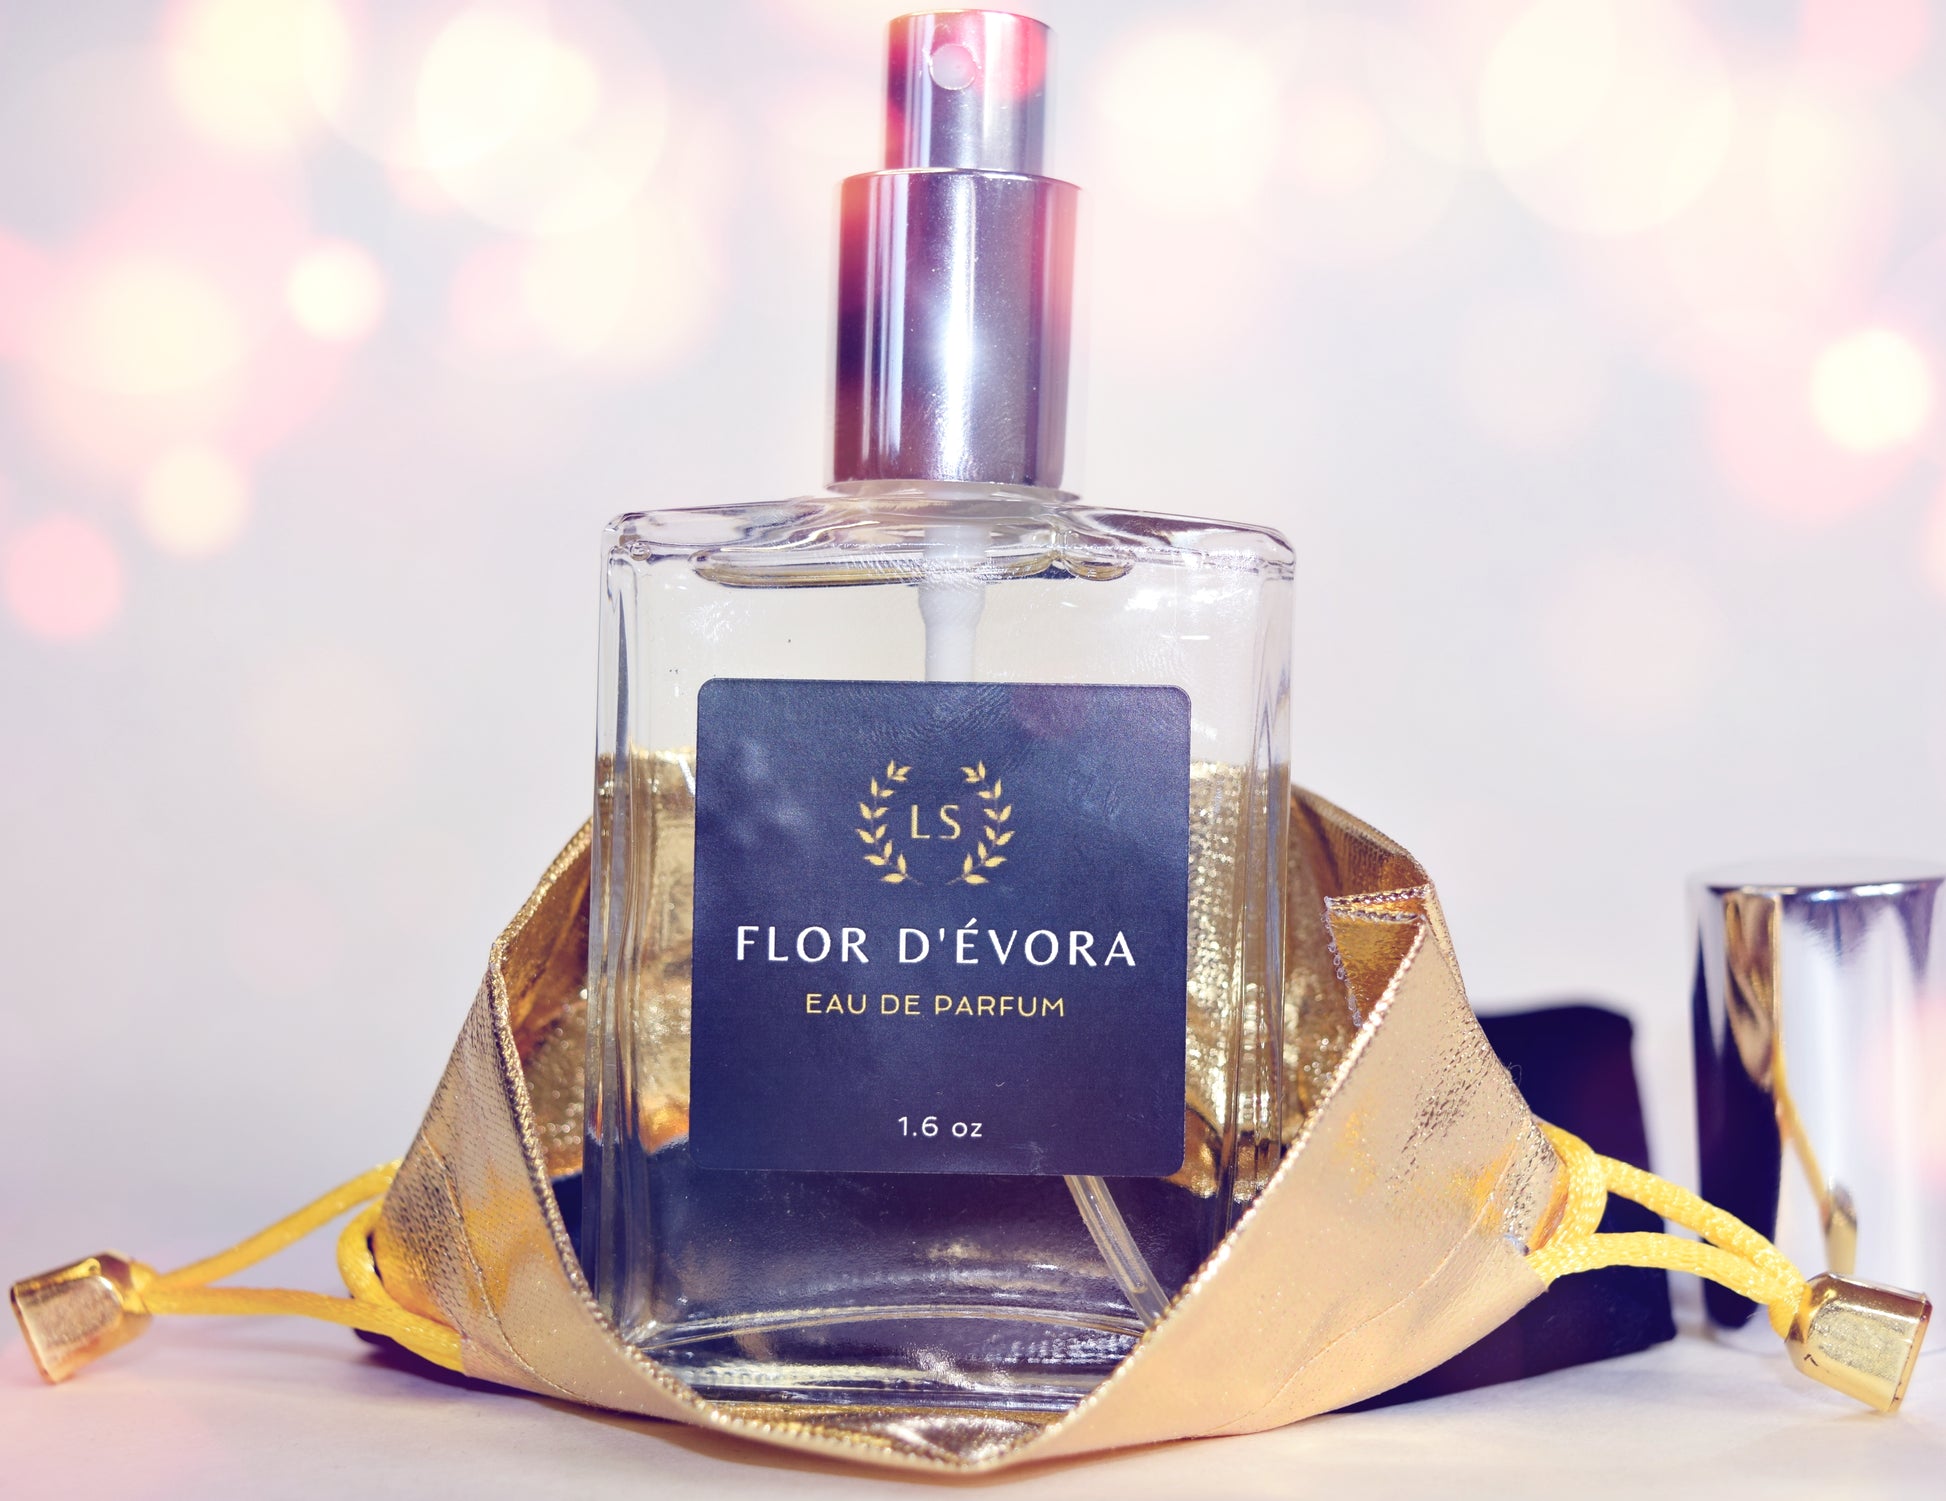 6 Enticing Lavender & Vanilla Perfumes for Her